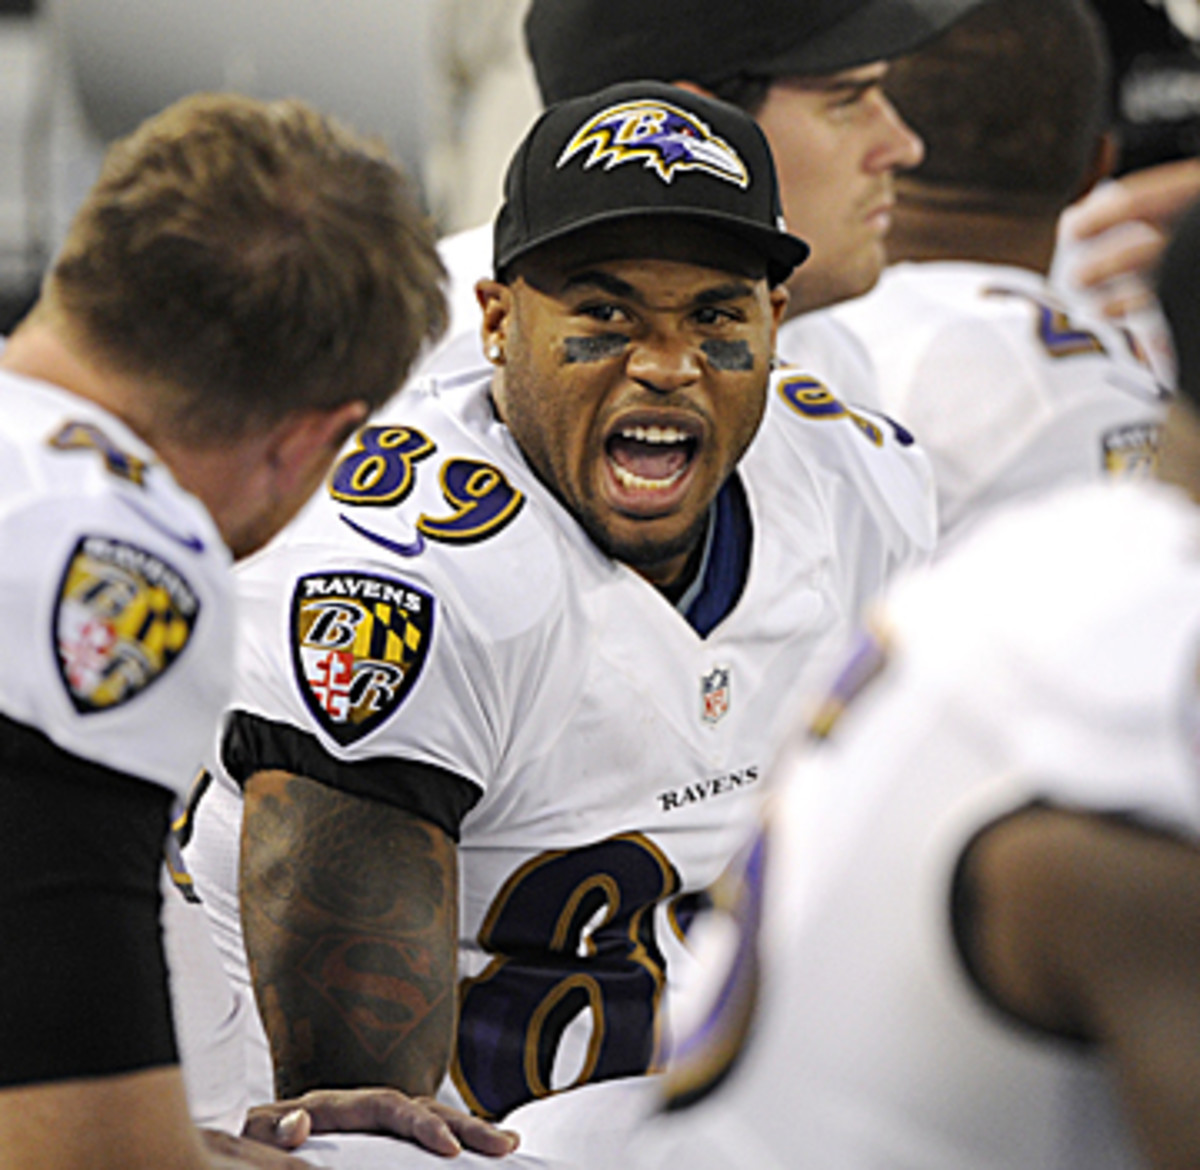 The move to Baltimore has Steve Smith fired up. (Nick Wass/AP)